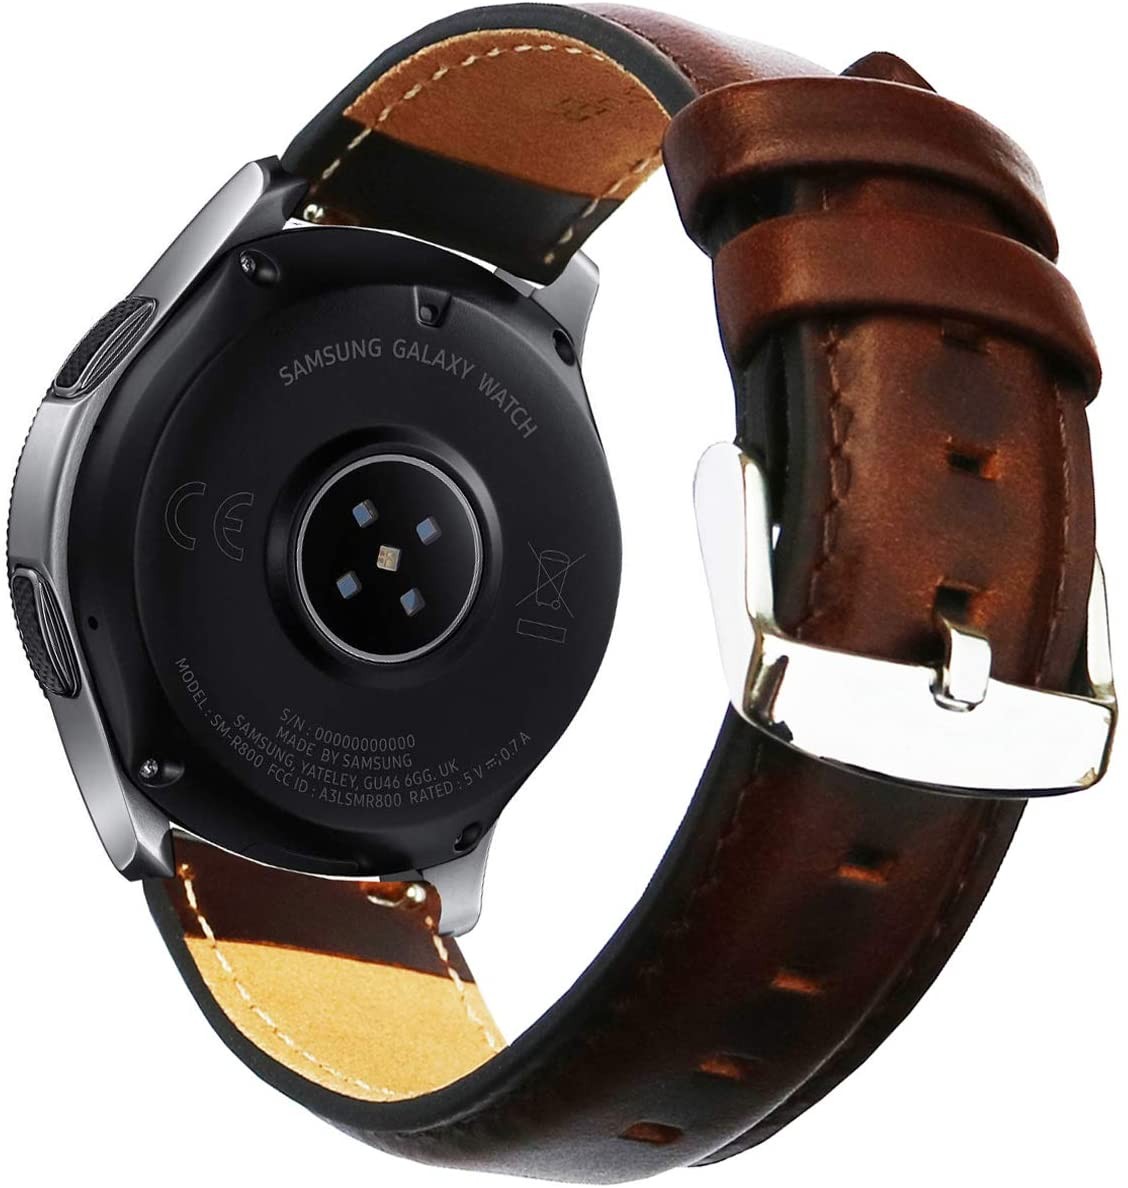 OTOPO Leather Band Compatible Ticwatch S2 / Ticwatch E2 Bands, 22mm Leather Strap Replacement Wrist